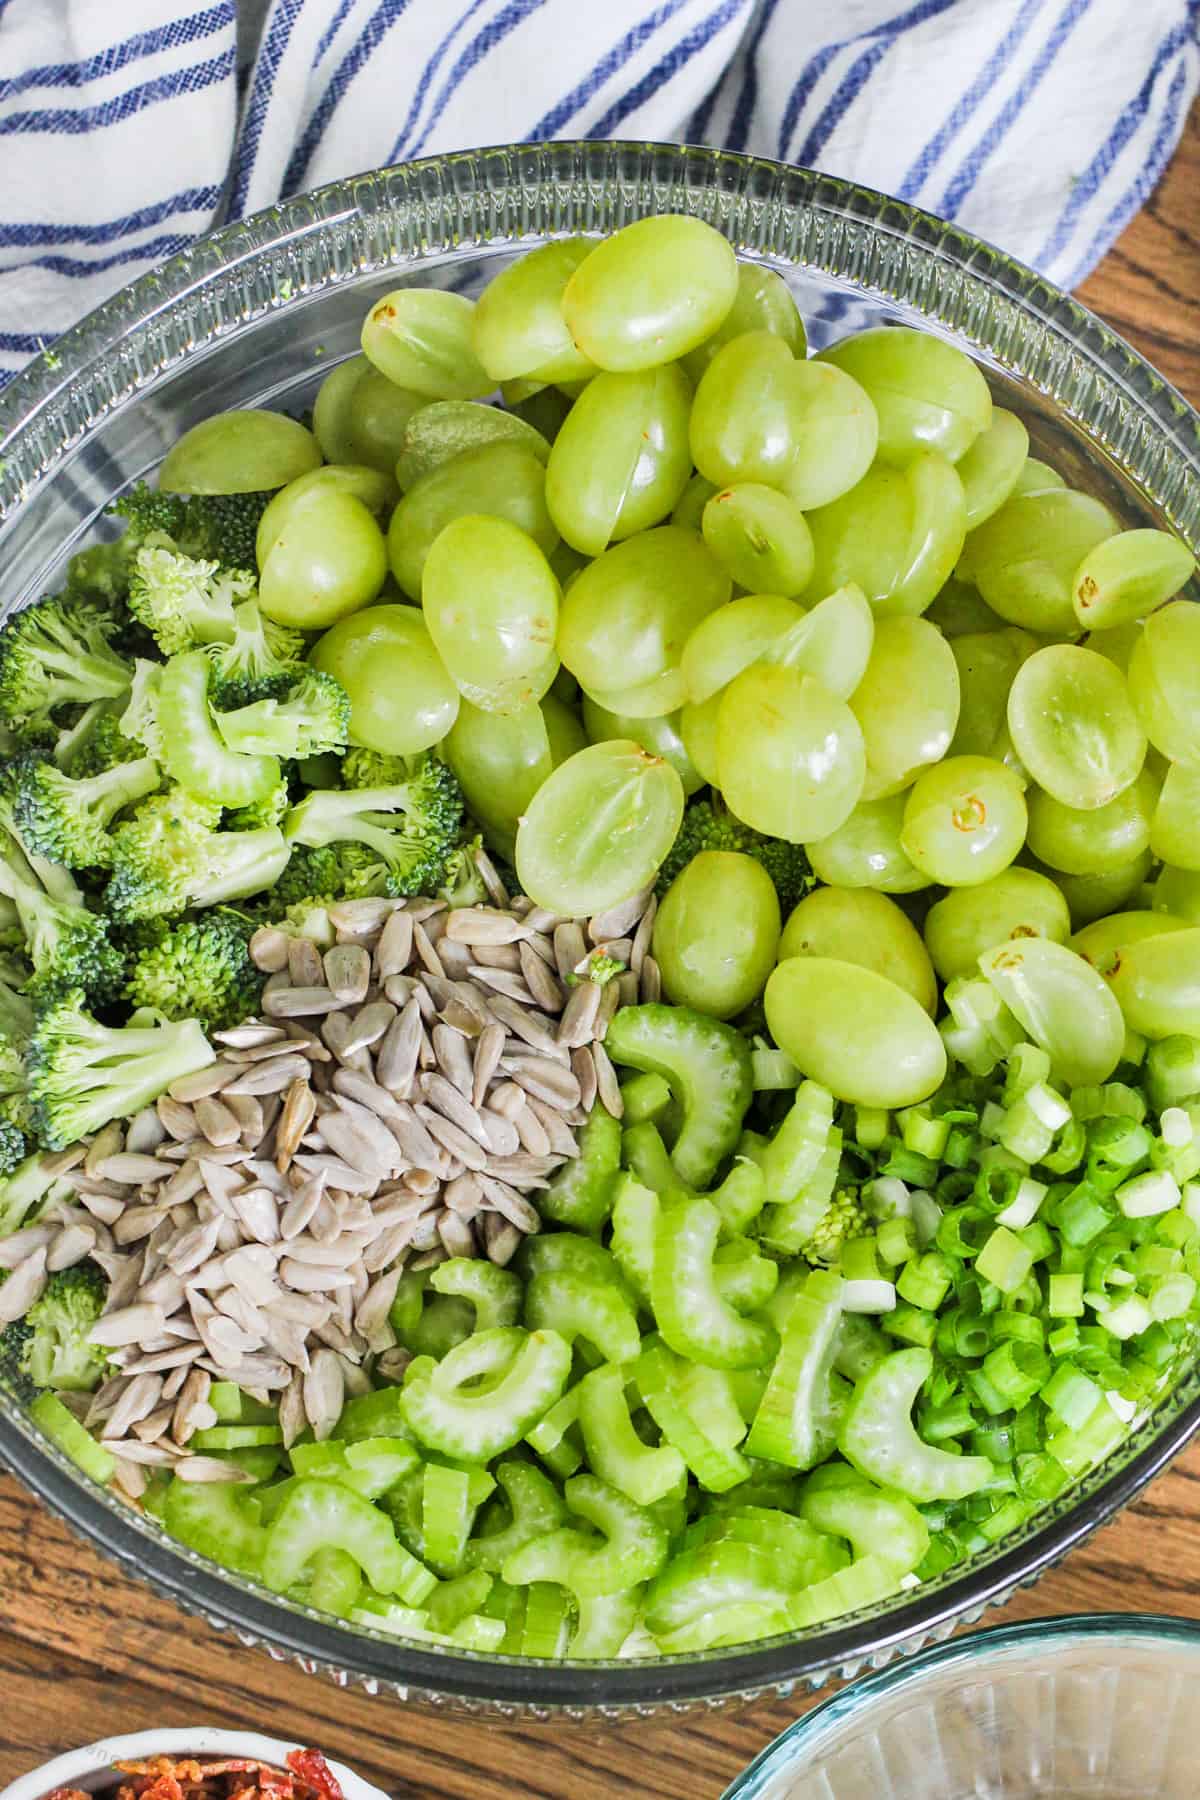 Broccoli Grape Salad ingredients in a bowl before mixing